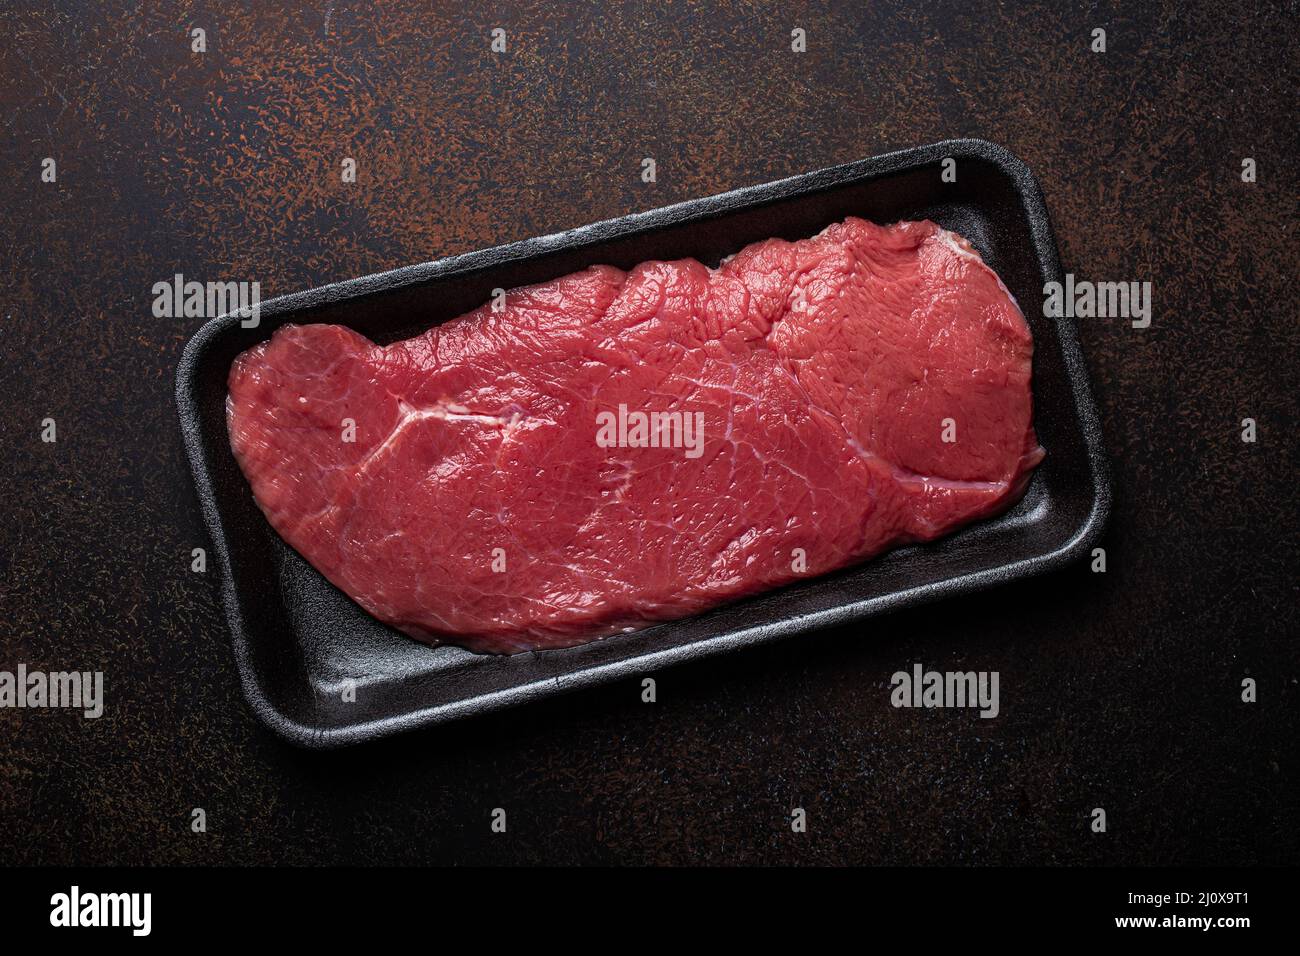 Beef lean raw fillet steak in black plastic container Stock Photo